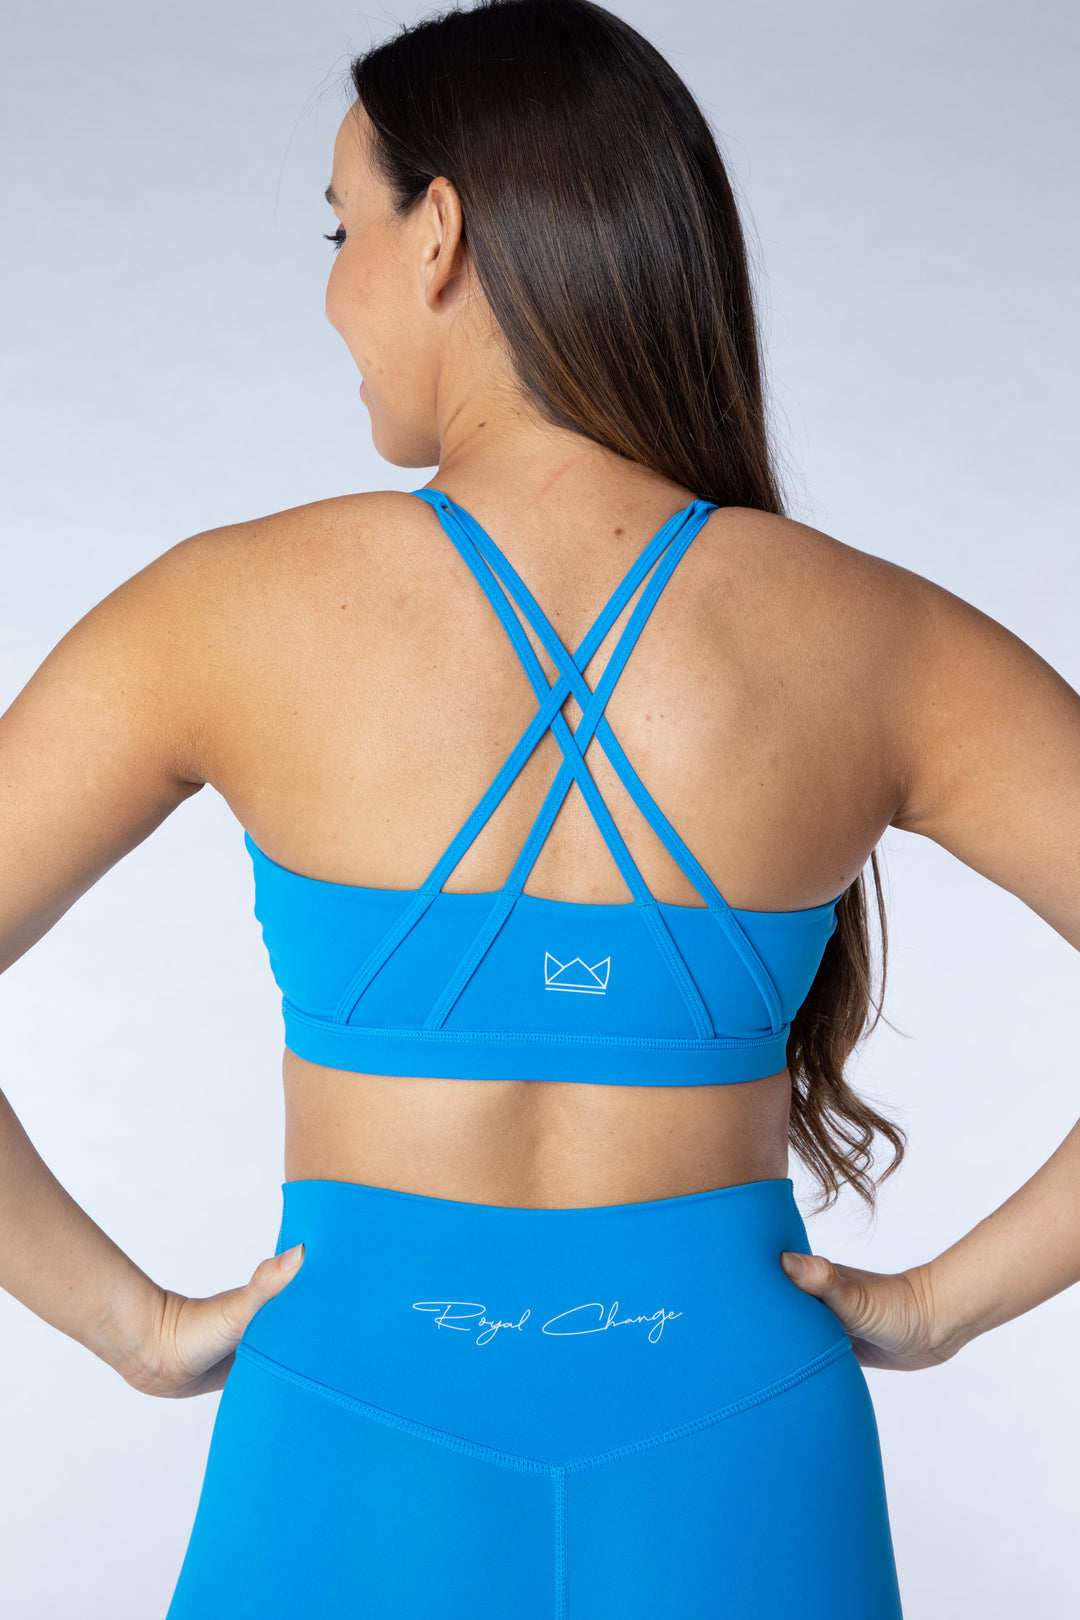 I Created A Product To Revolutionize The Sports Bra Market